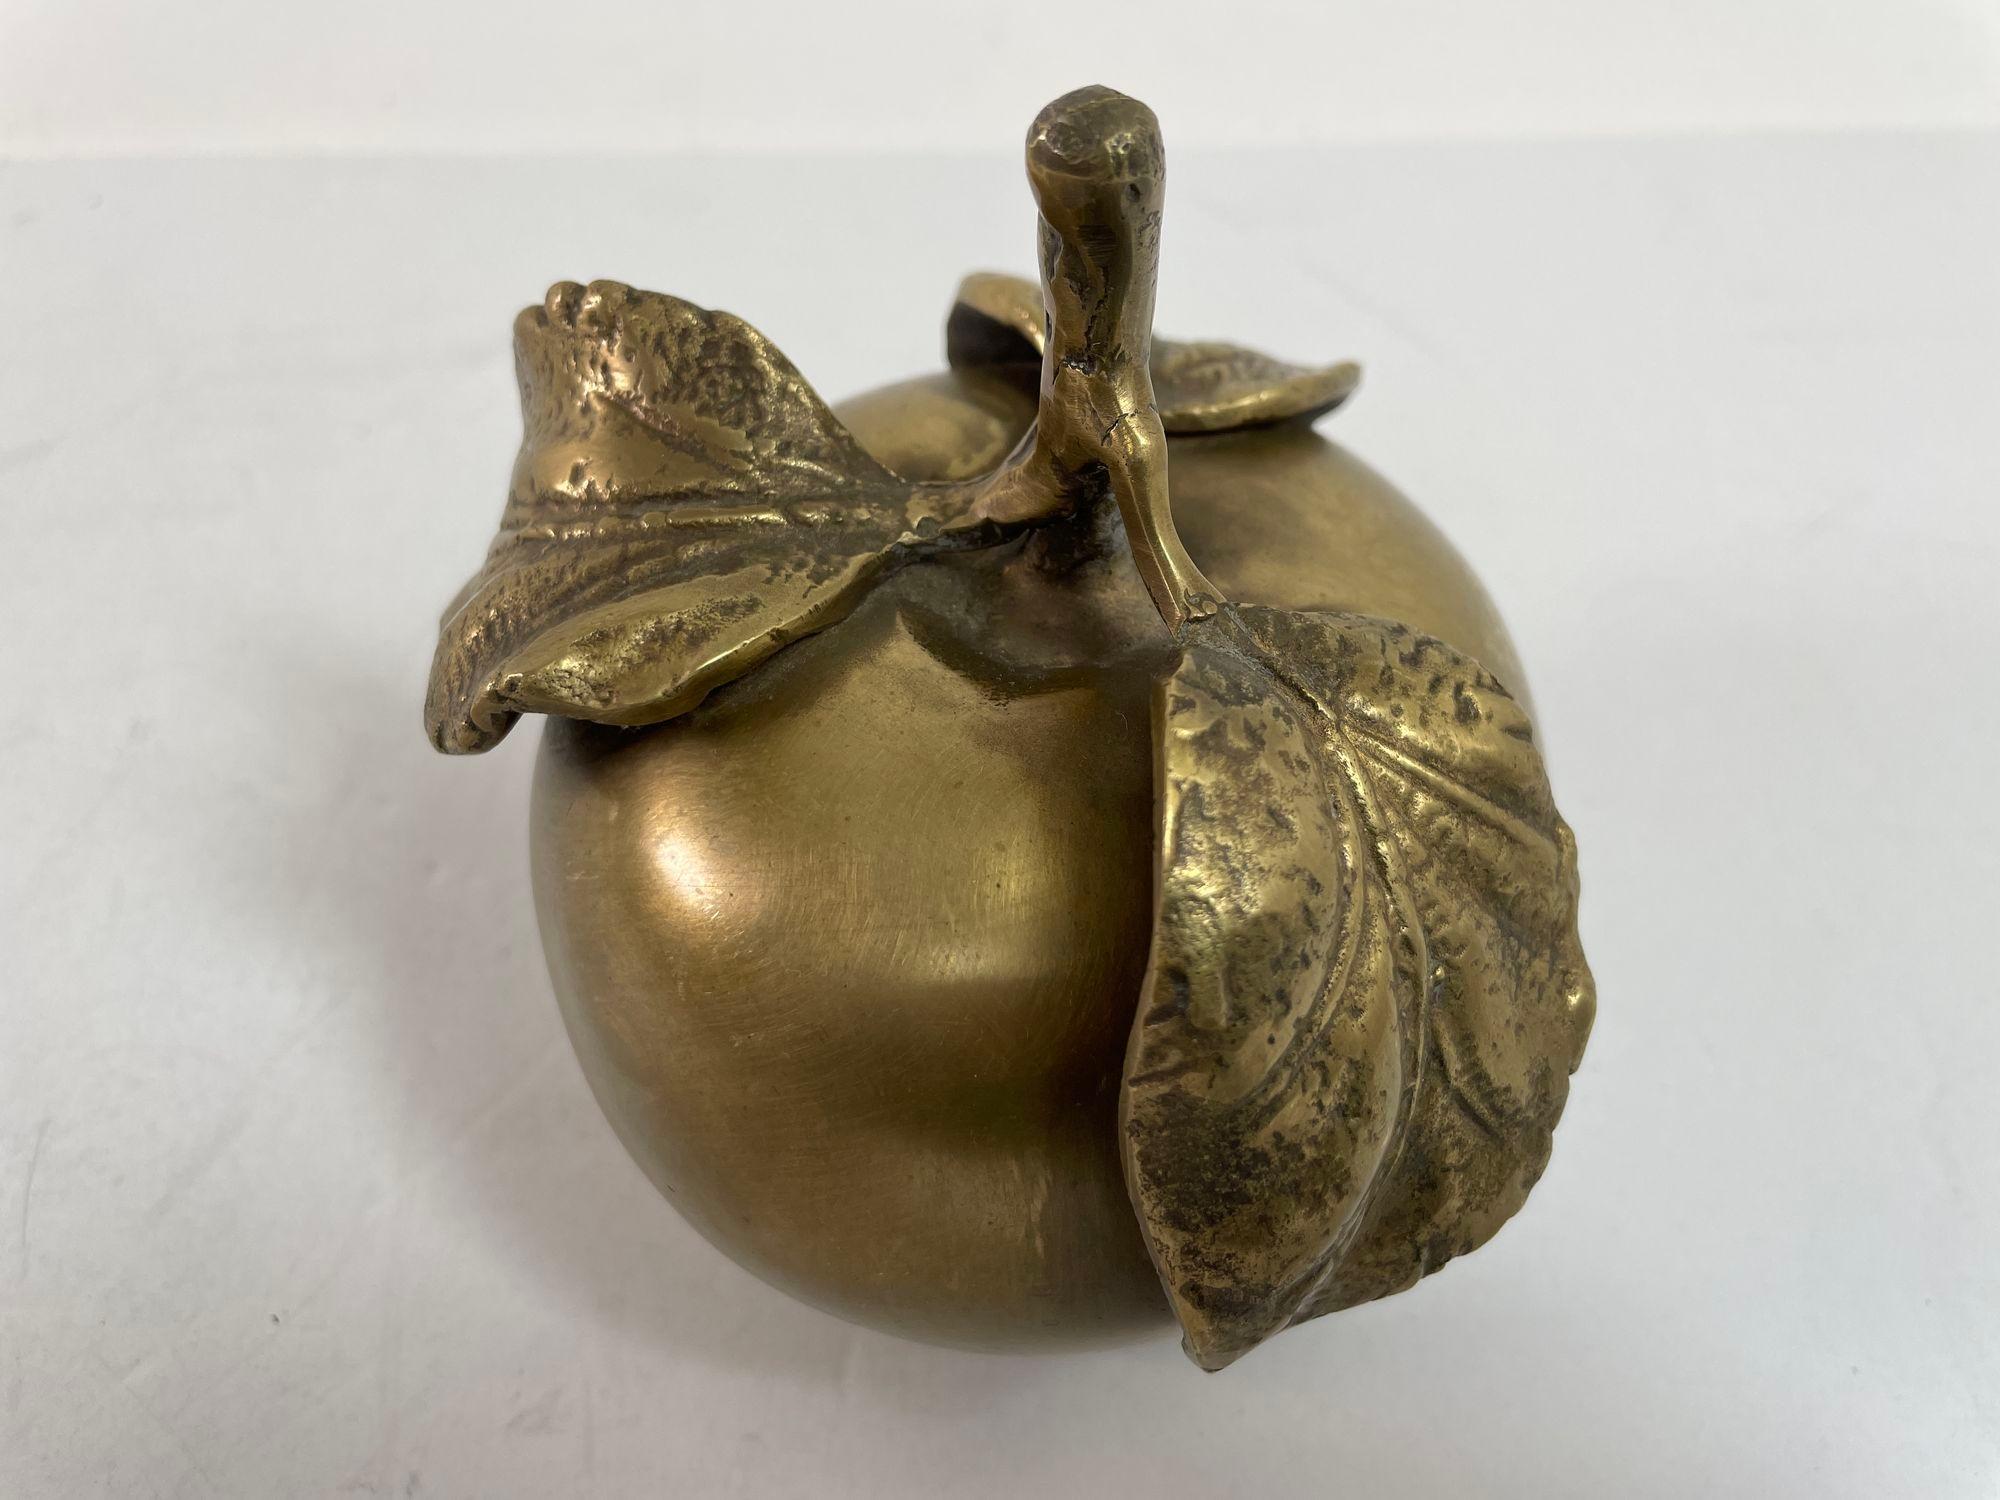 Vintage Brass Apple Sculpture Paperweight For Sale 4